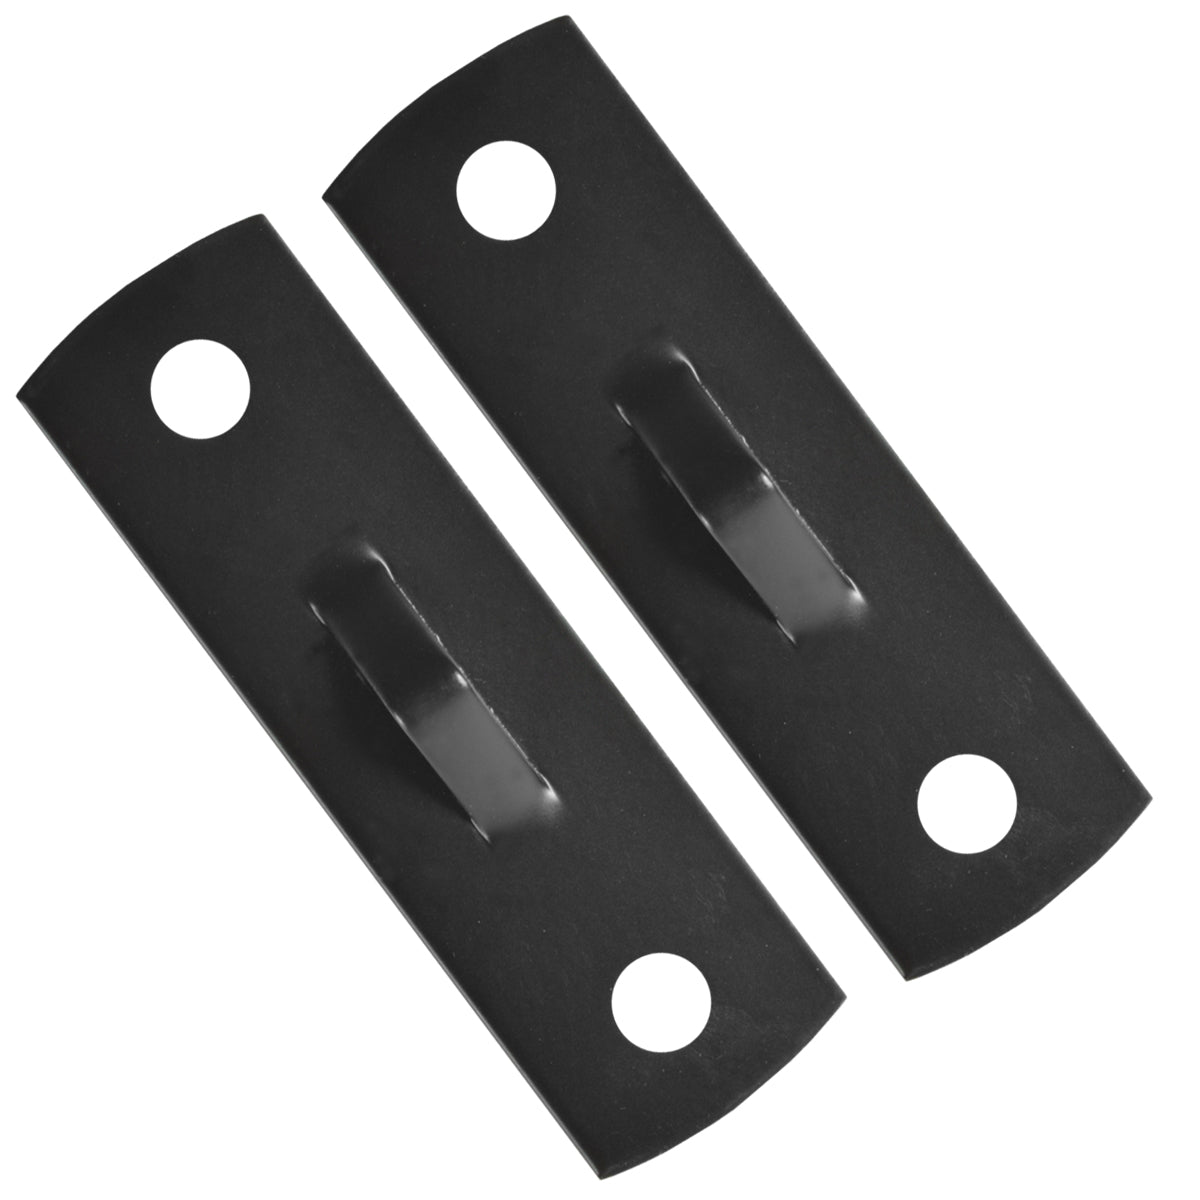 Forza Sports Double End Bag Floor and Ceiling Mount Brackets - Black Forza Sports